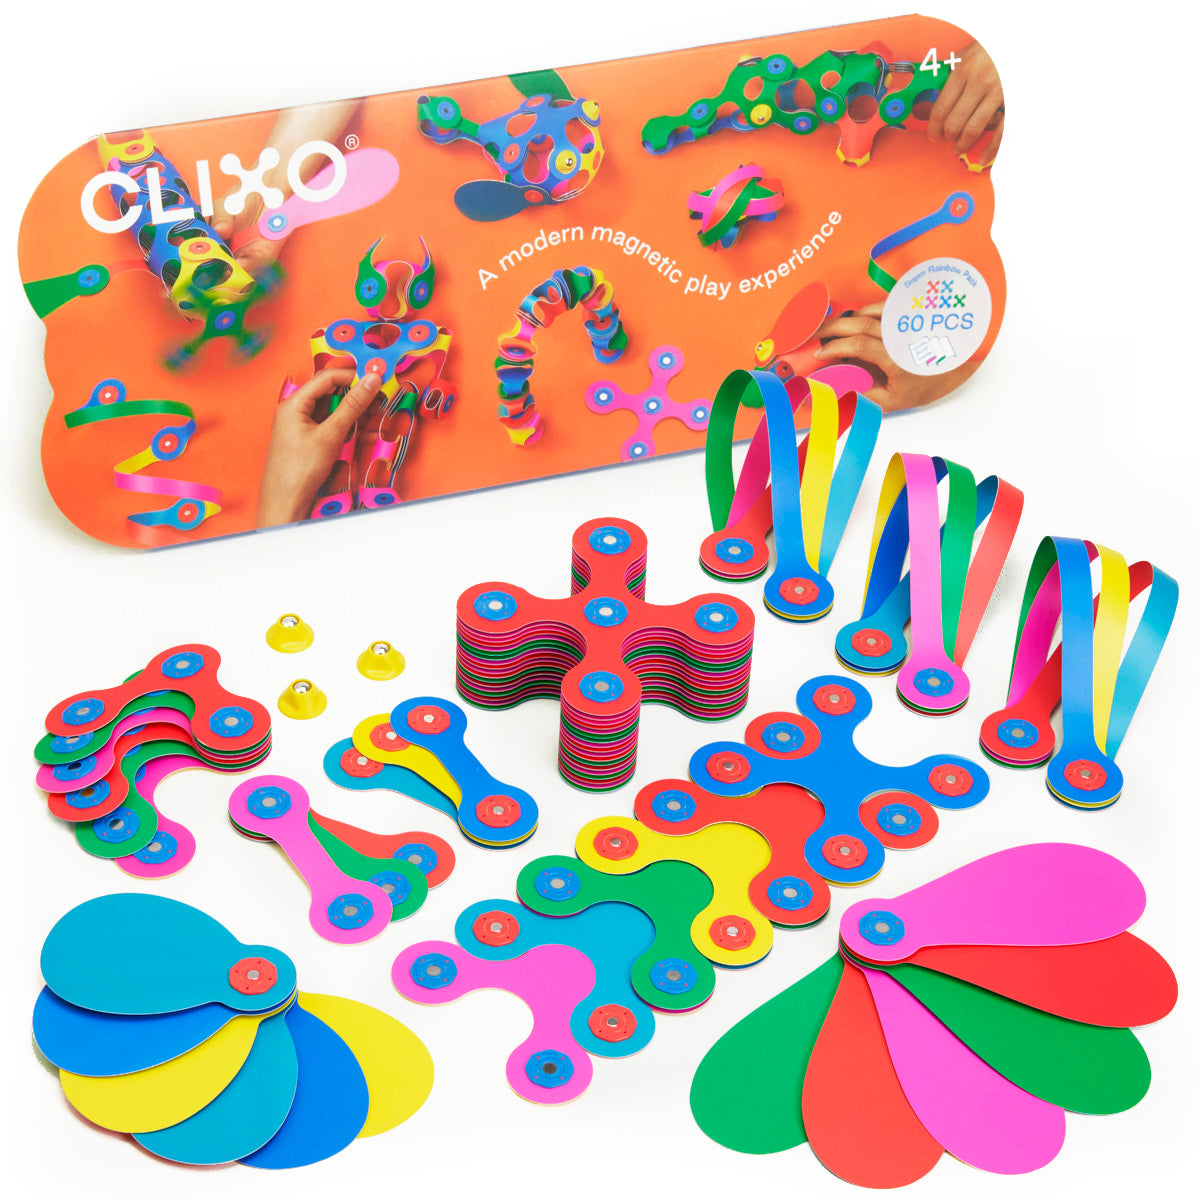 the Clixo Super Rainbow Pack on display with all pieces in front of the orange box